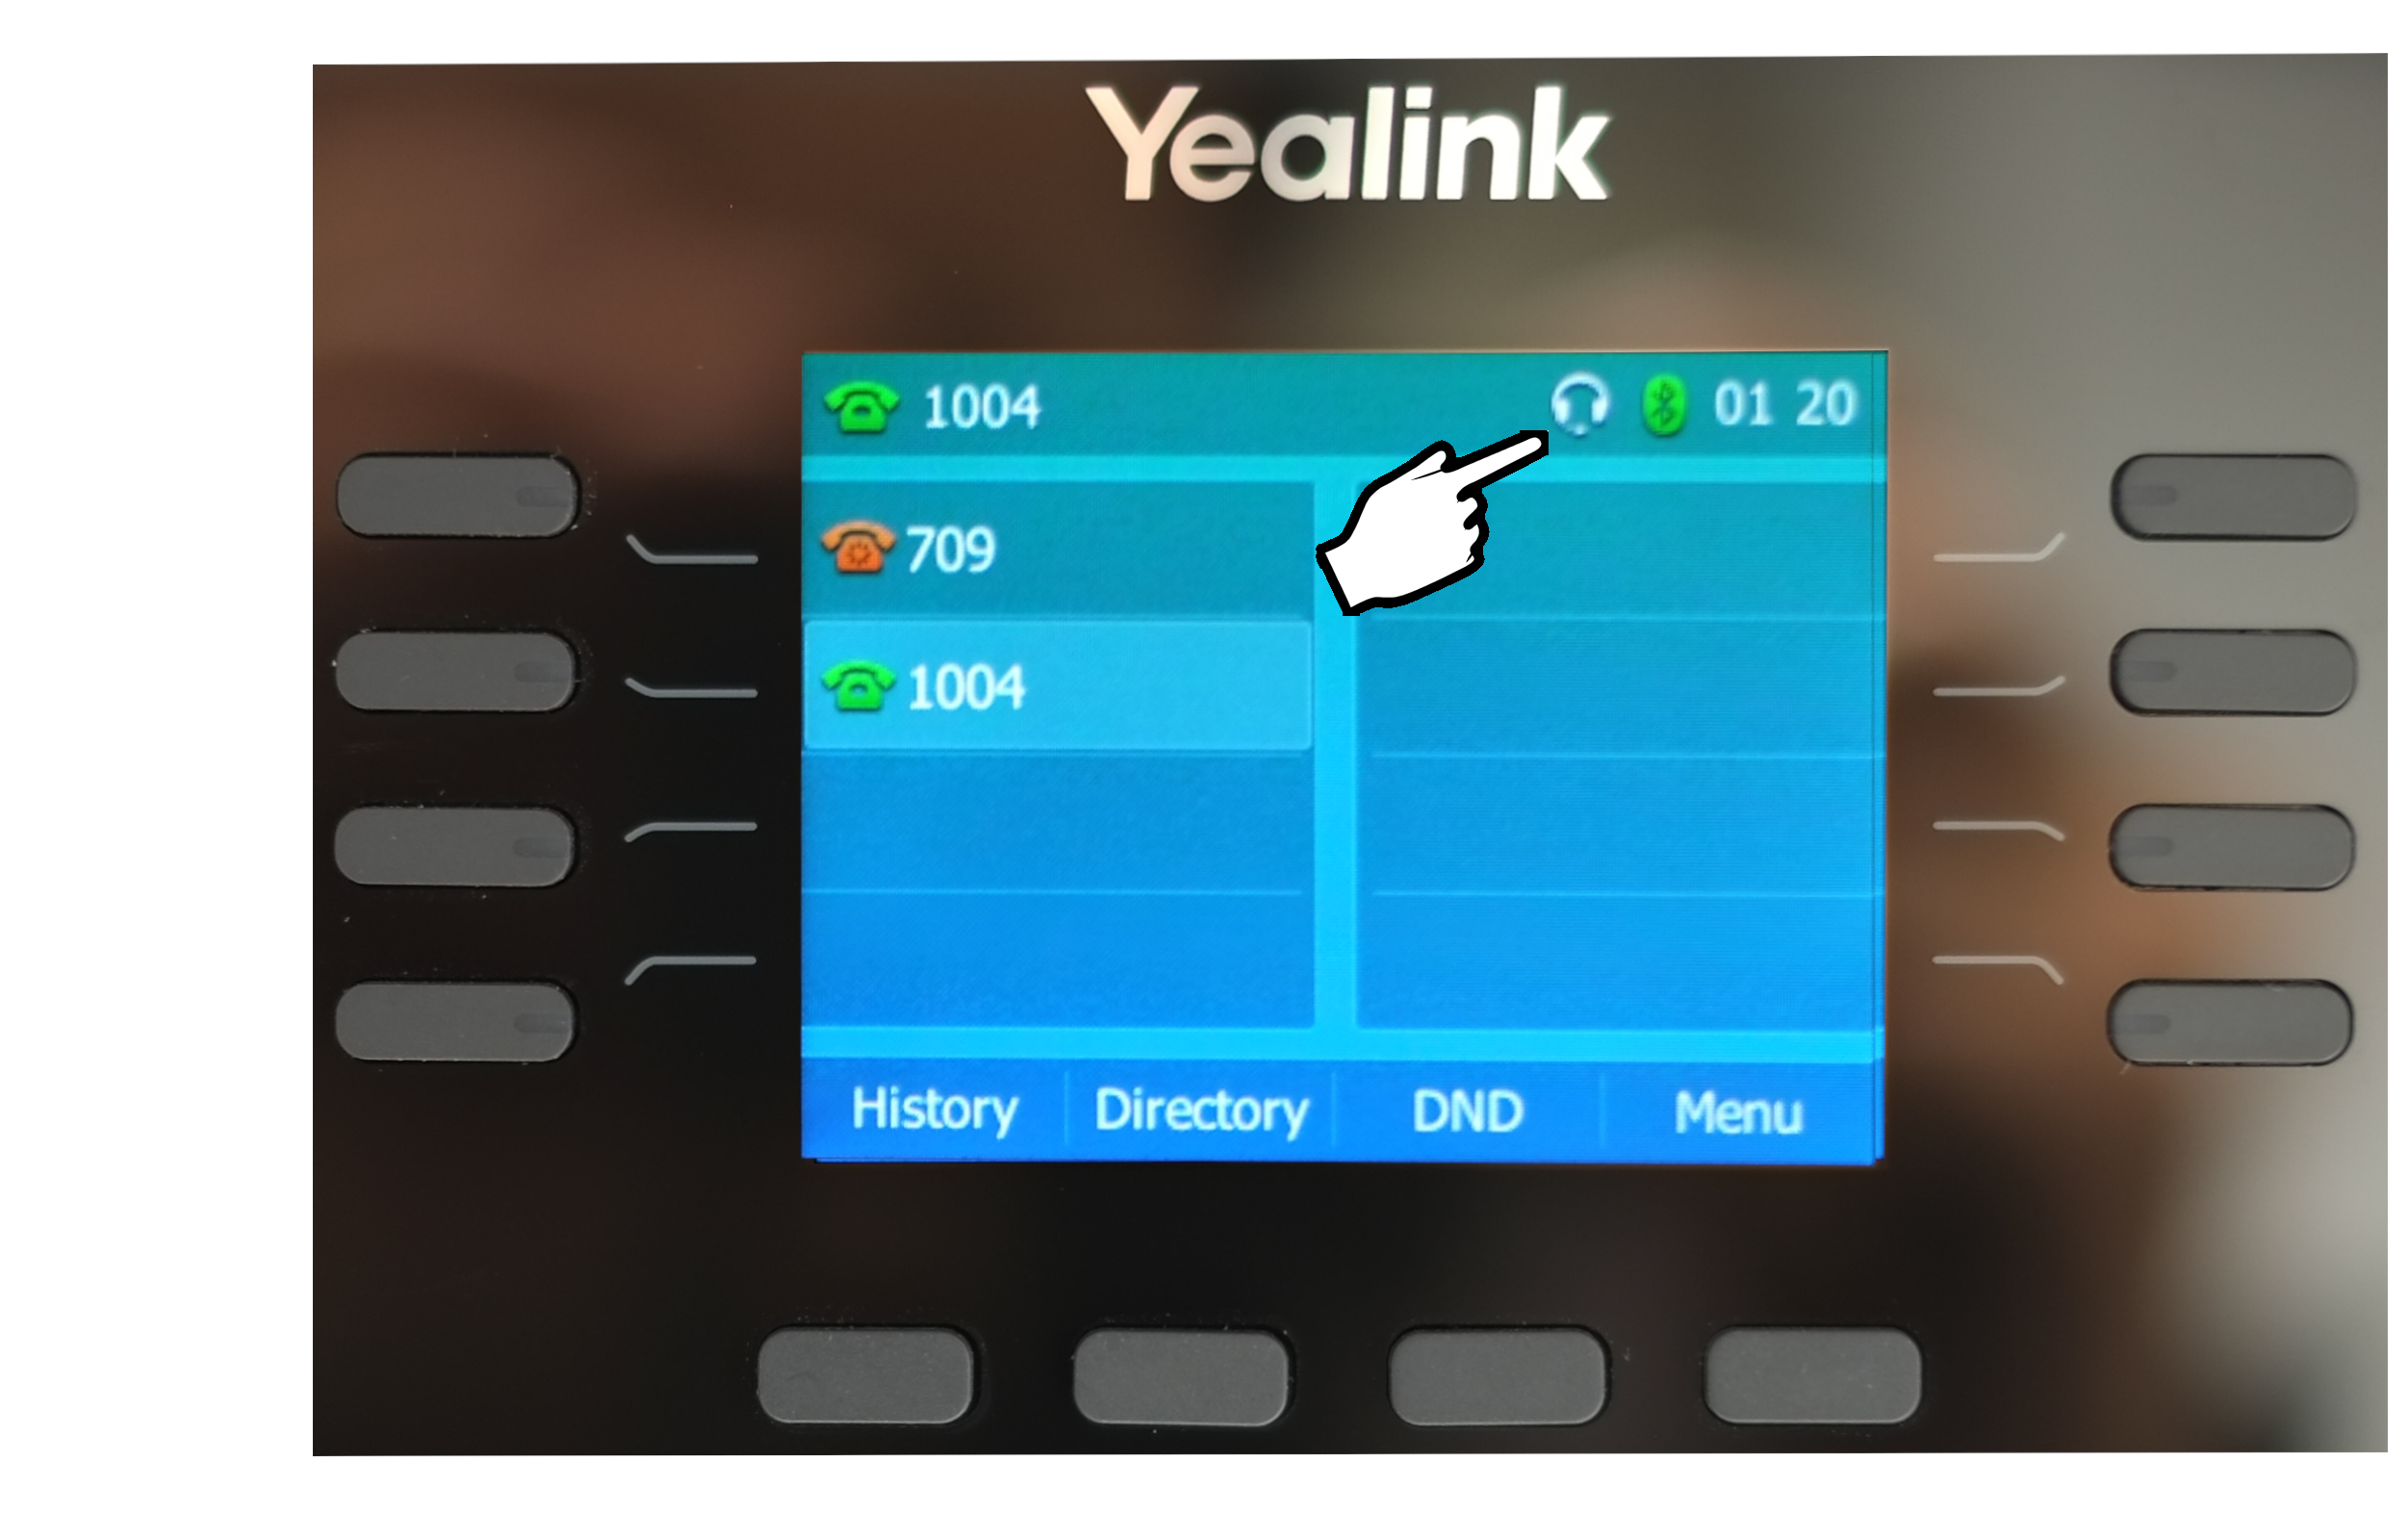 Yealink phone Bluetooth device connected